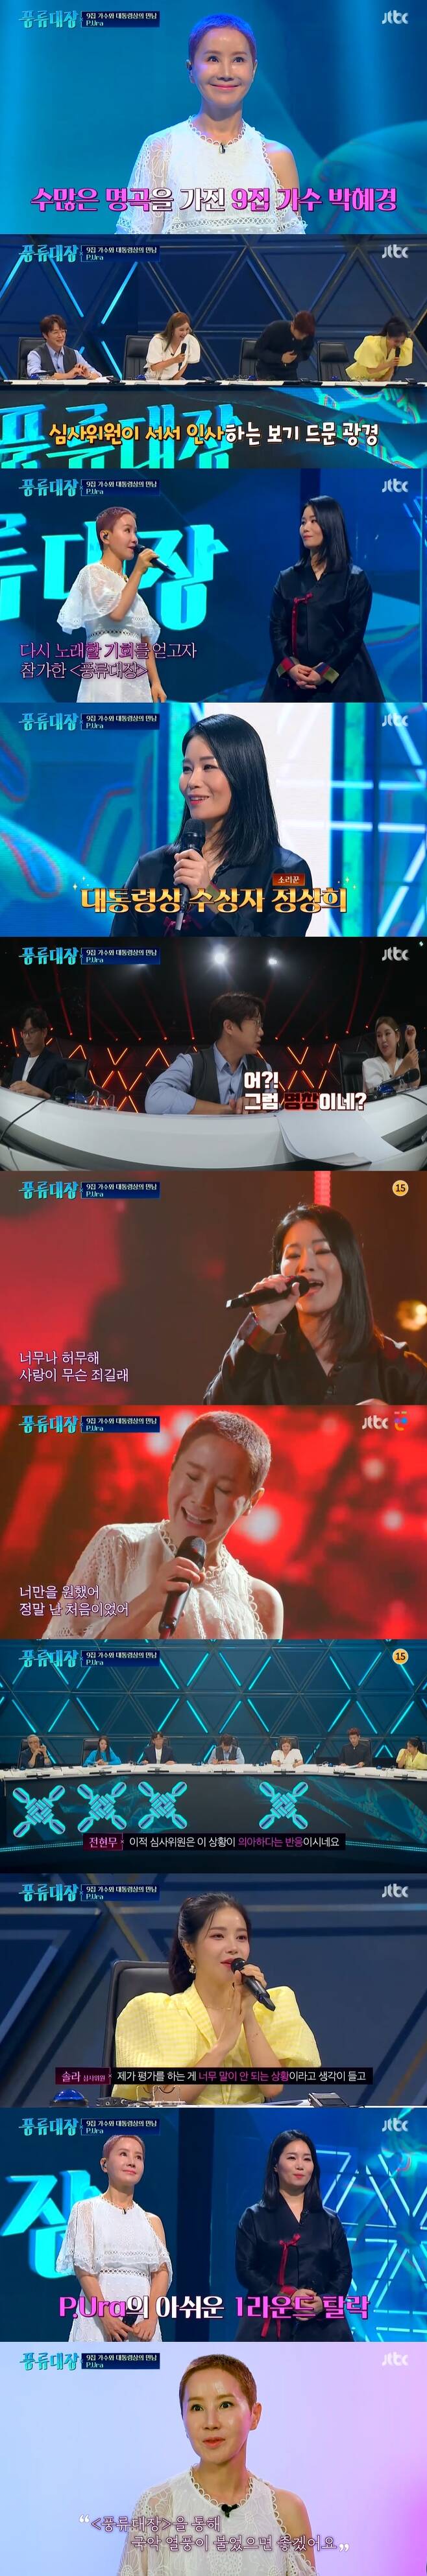 Seoul) = Singer Dr. Hye-Kyung joined hands with Myeongchang Jung Sang-hee but was unfortunately eliminated.In the JTBC entertainment program wind flow ledger - War of the Heap Sorcerers, which was broadcasted on the afternoon of the 5th, there were a lot of singers who boasted tremendous ability after one time.9th album Singer Dr. Hye-Kyung, who has numerous hits, also appeared and focused attention: He was united with President Award winner Jung Sang-hee, but was shocked by his elimination in the first round.Dr. Hye-Kyung scrambled with Jung Sang-hui as a team called P.Ura.Judge Song Gain, Jung Wooyoung and Solar were surprised by the appearance of the presidential election Dr. Hye-Kyung.Jung Wooyoung said, We will stand up and listen.Dr. Hye-Kyung revealed the reason for the Top Model: Dont you wonder why I came out, in fact, the beginning of my Singer life was Pansori.When I was a mountain girl, I watched TV and Cho Yong-pil said that I had a pansori. I learned pansori because I had to do pansori to become a singer. He also told me why he came out as a team: I had two Spiny red gurnard surgeries as a singer, but I didnt have a chance (to stand on stage).I had this opportunity and I became Top Model  I had to go to the best person in Pansori, so I persuaded him. The singer, Jung Sang-hee, was the Chrysanthemc who won the Presidential Award. Song Ga-in acknowledged his skills by saying, You can hear the sound of the famous singer by receiving the Presidential Award.They selected Kim Gun-mos Love is Going away. In the middle of the year, they exchanged voices through Love.Husky and charming voice admiration came out, but Sung Si-kyung, Jung Wooyoung and Sola did not press the pass button.When P.Ura received the 4 Cross, the transfer of the judges was wondering, but said, There are different ideas. Solar said, I think it is too ridiculous for me to evaluate.But it seems to be more attractive when (each) alone. Sung Si-kyung also added, I do not think the two of you have synergies, or the mind has not moved.Jung Sang-hee, who was disappointed in the first round, said, I met a lot of juniors here. I will go and study.Dr. Hye-Kyung accepted the results calmly and said, I hope that the Chrysanthemc craze will blow like a trot.On this day, Chrysanthemc Prince Kim Junsoo, Song Gains best friend Seo Jin-sil, 25-year-old singer Odan Hae, performance Chrysanthemc band V-Star, and humorous singer Choi Jae-gu were praised and advanced to the next round.Meanwhile, wind flow ledger - War of Hip Singers is Koreas first Chrysanthemc contest program that gives viewers the charm and charm of Chrysanthemc through crossover of Chrysanthemc and popular music.It is broadcast every Tuesday at 9 p.m.